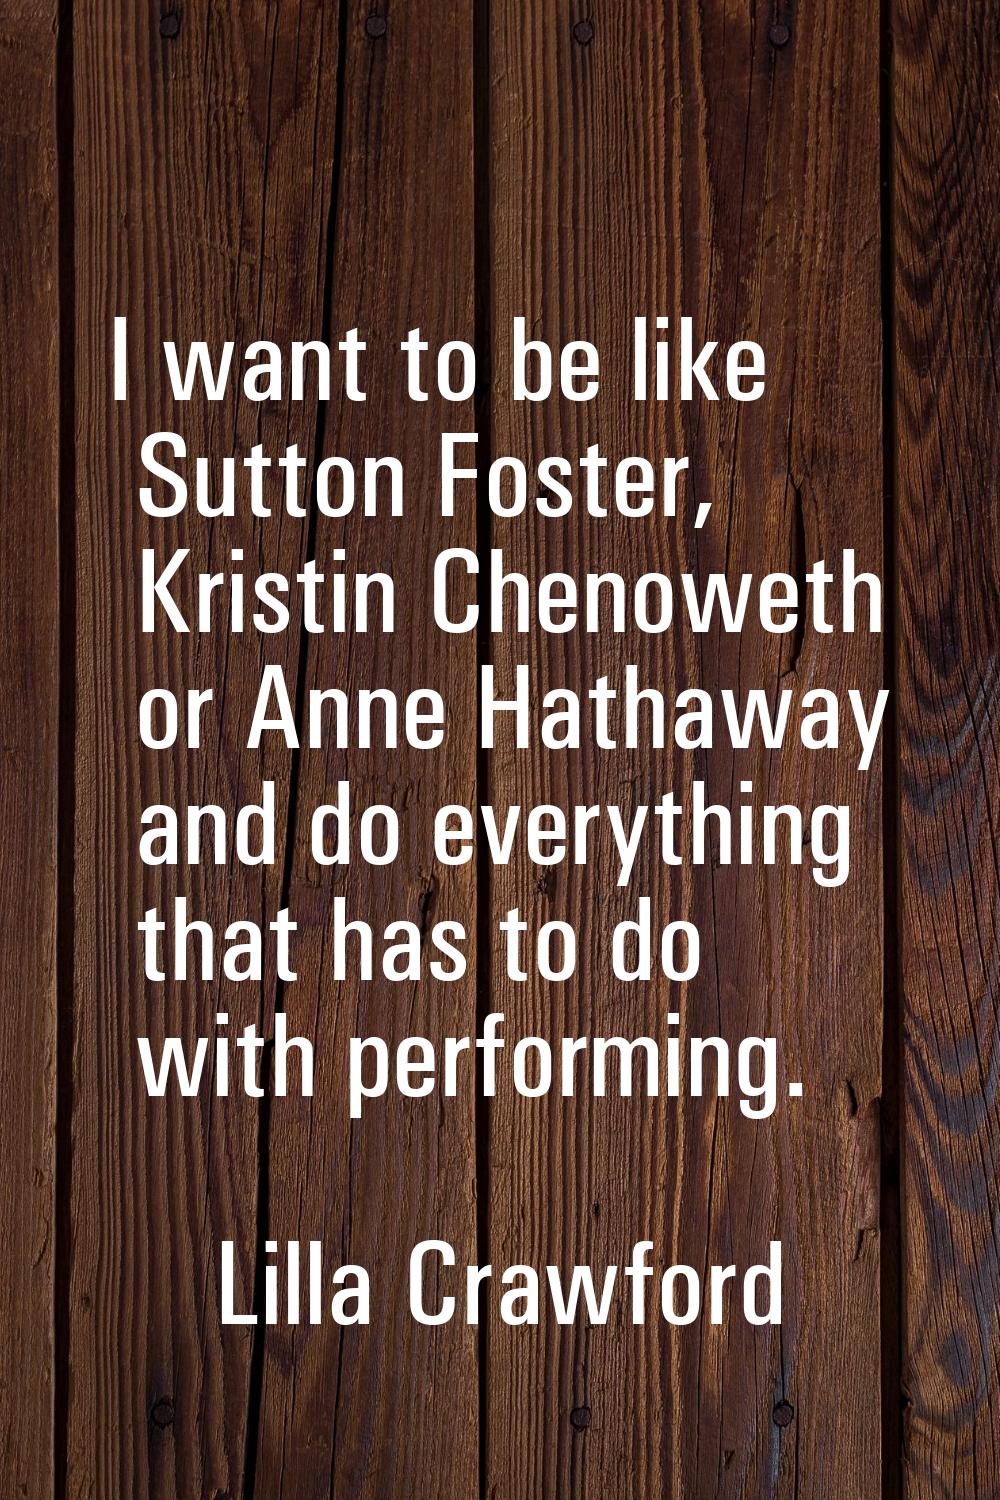 I want to be like Sutton Foster, Kristin Chenoweth or Anne Hathaway and do everything that has to d